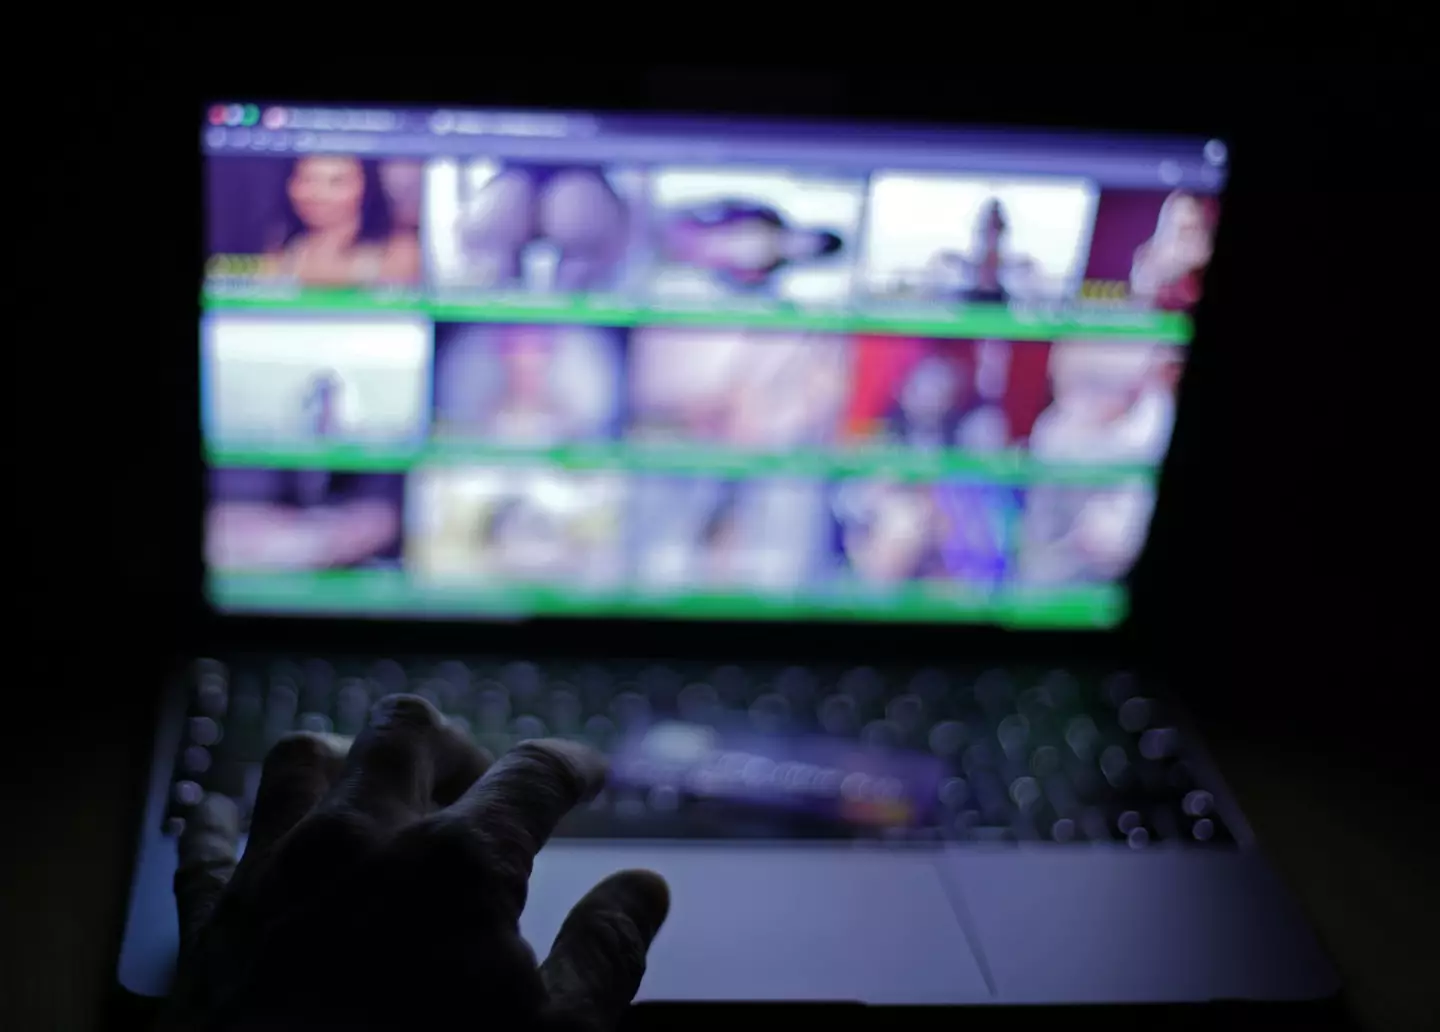 Rebecca looked at the most popular videos to gain a better understanding of trends in porn.